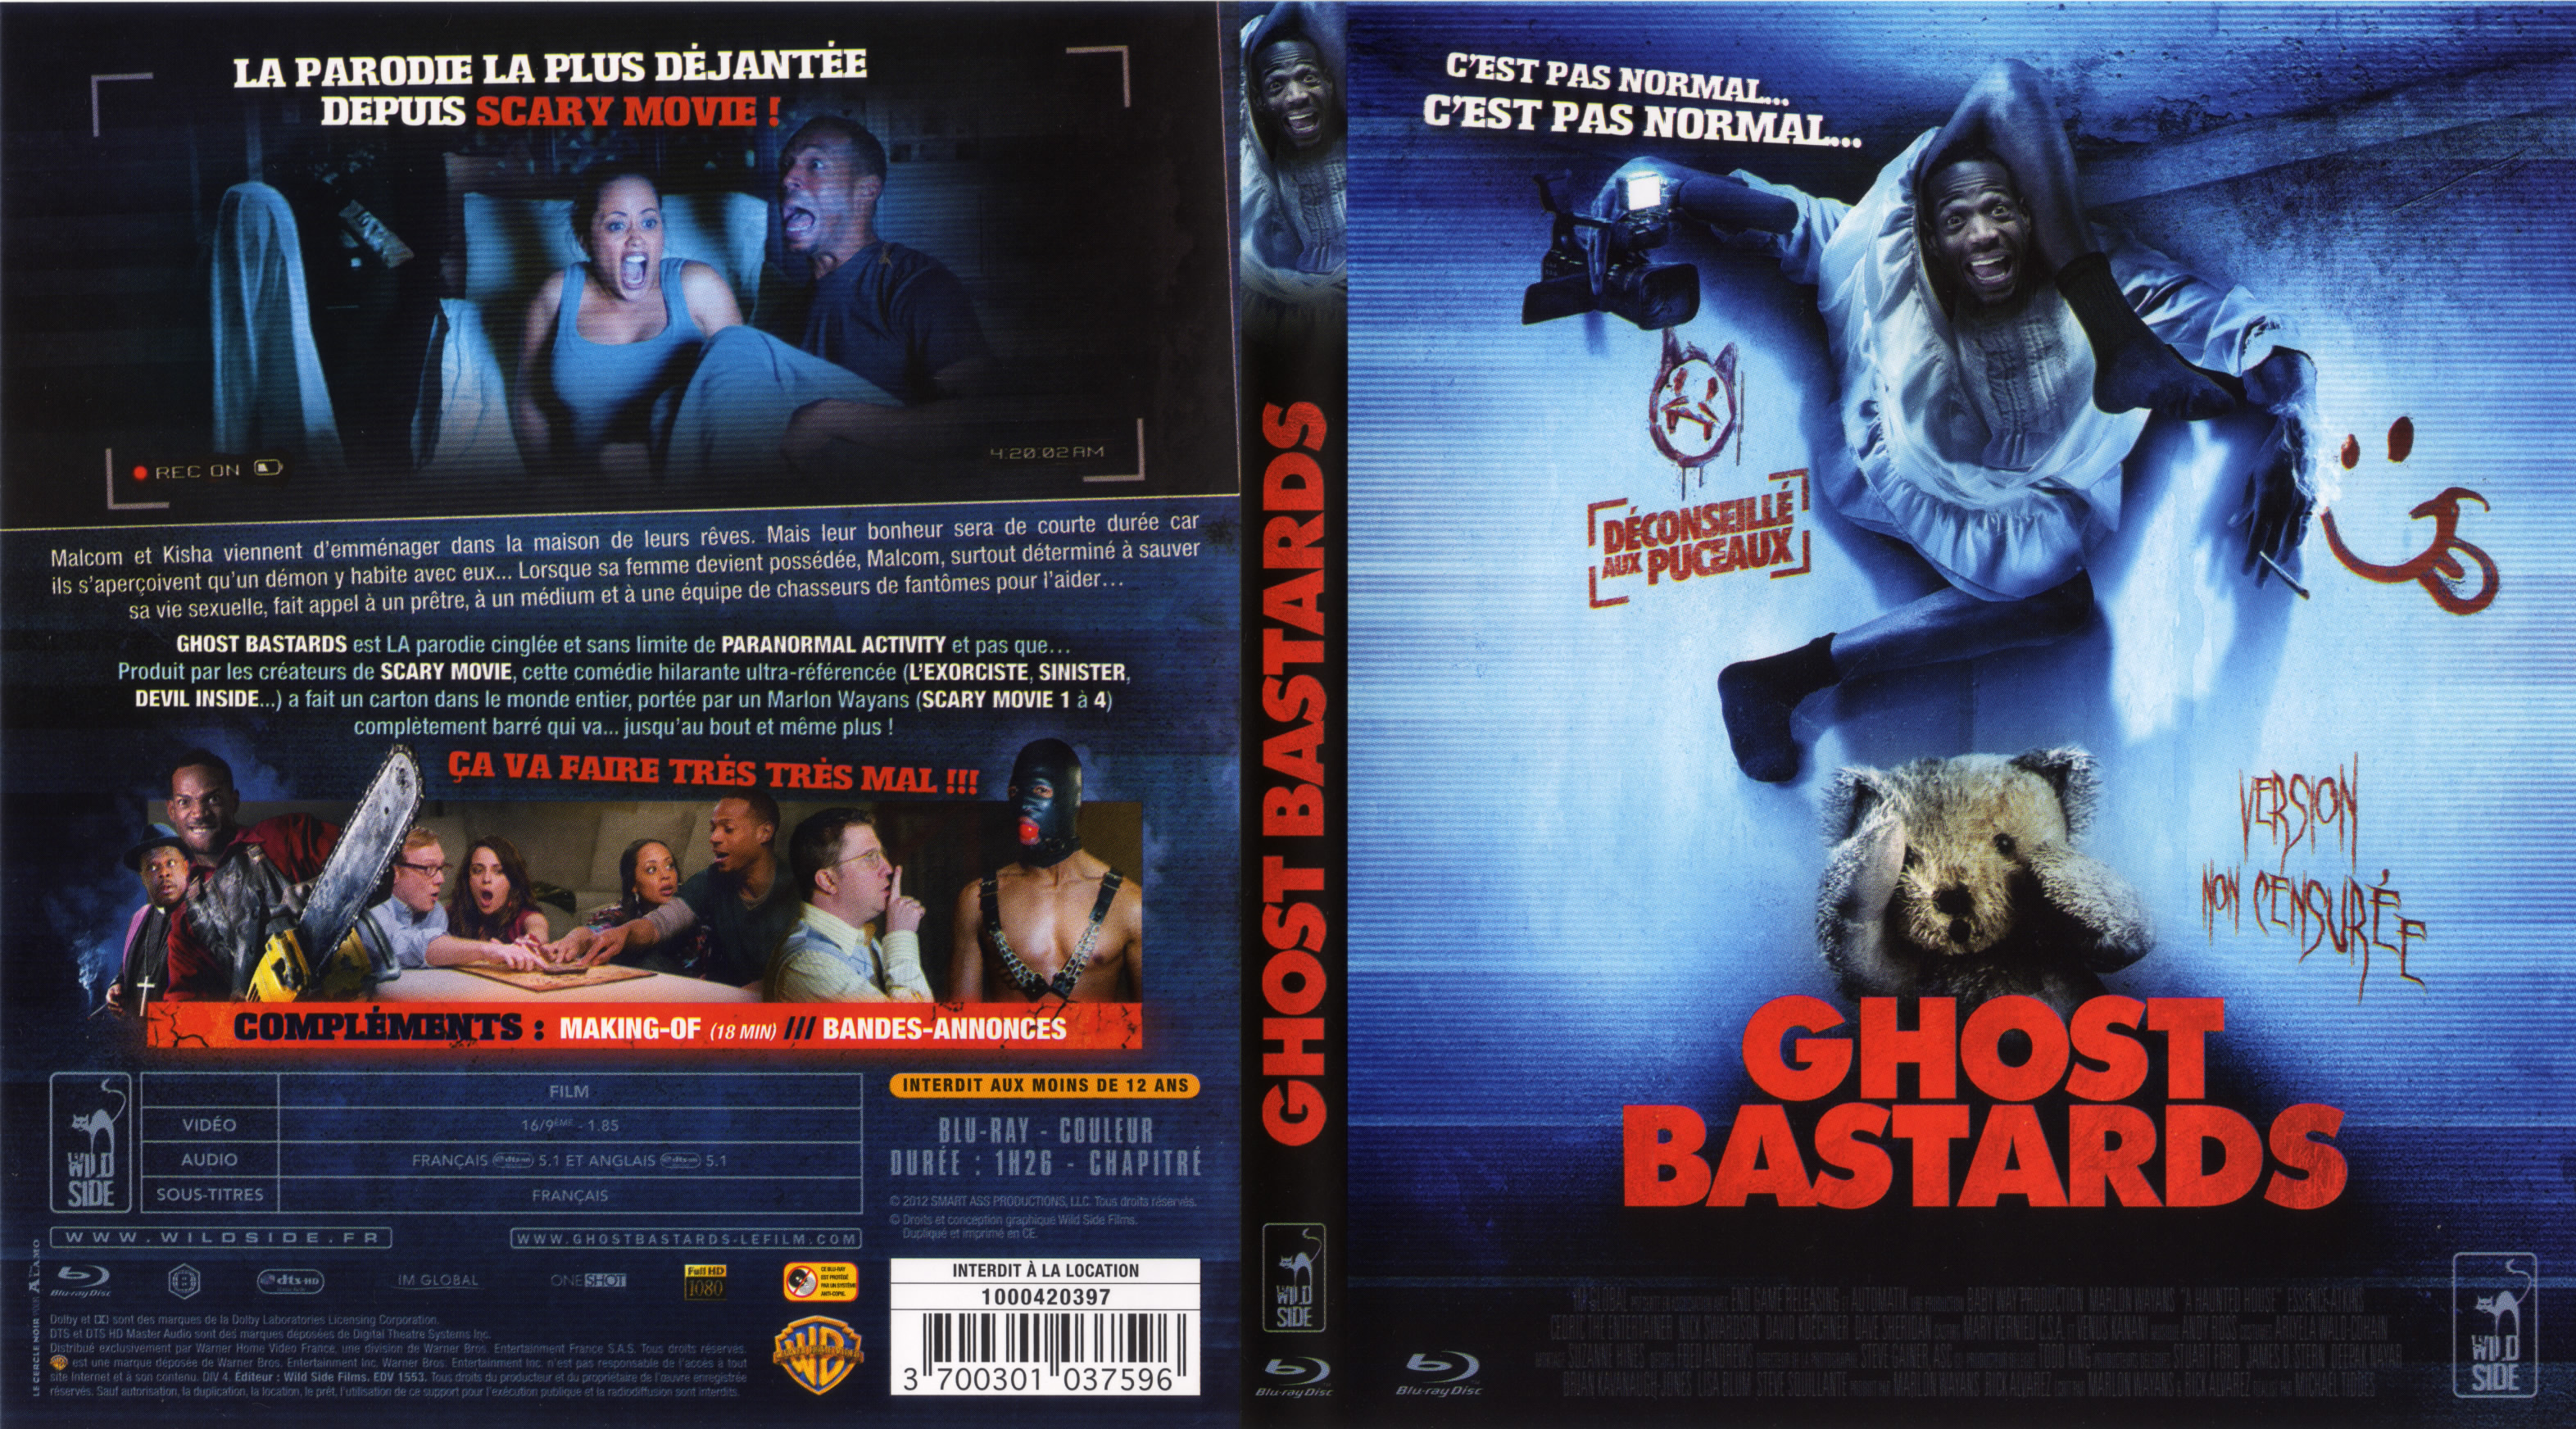 Jaquette DVD Ghost Bastards (BLU-RAY)